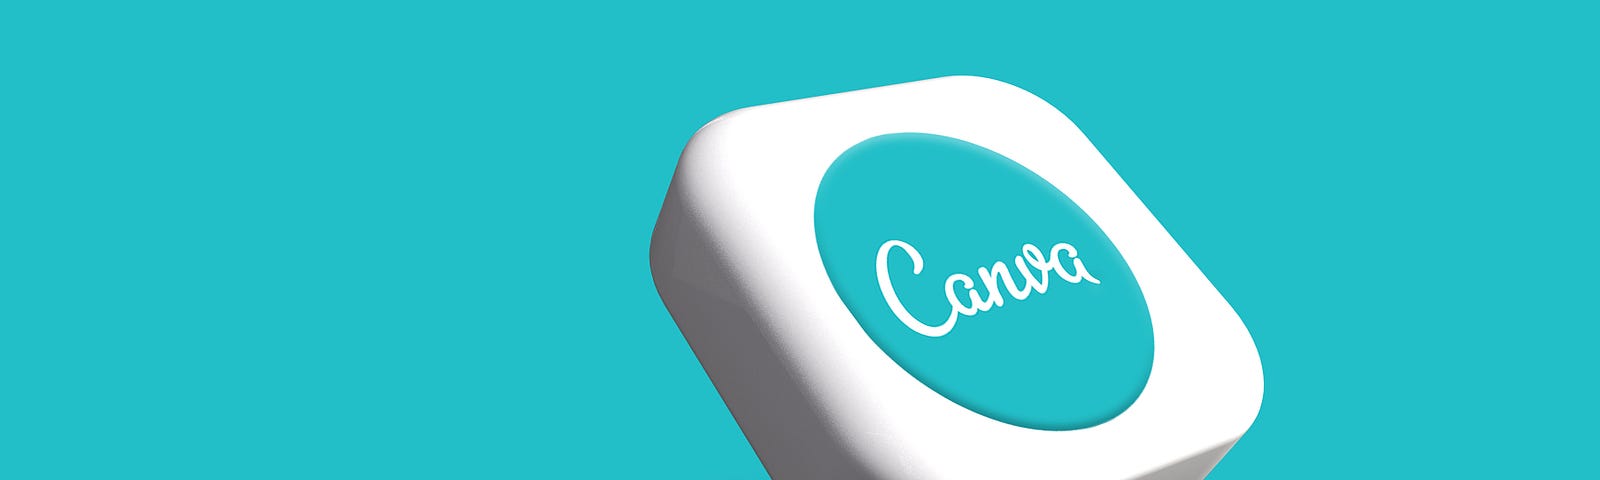 canva logo on a 3D button with a bright blue background